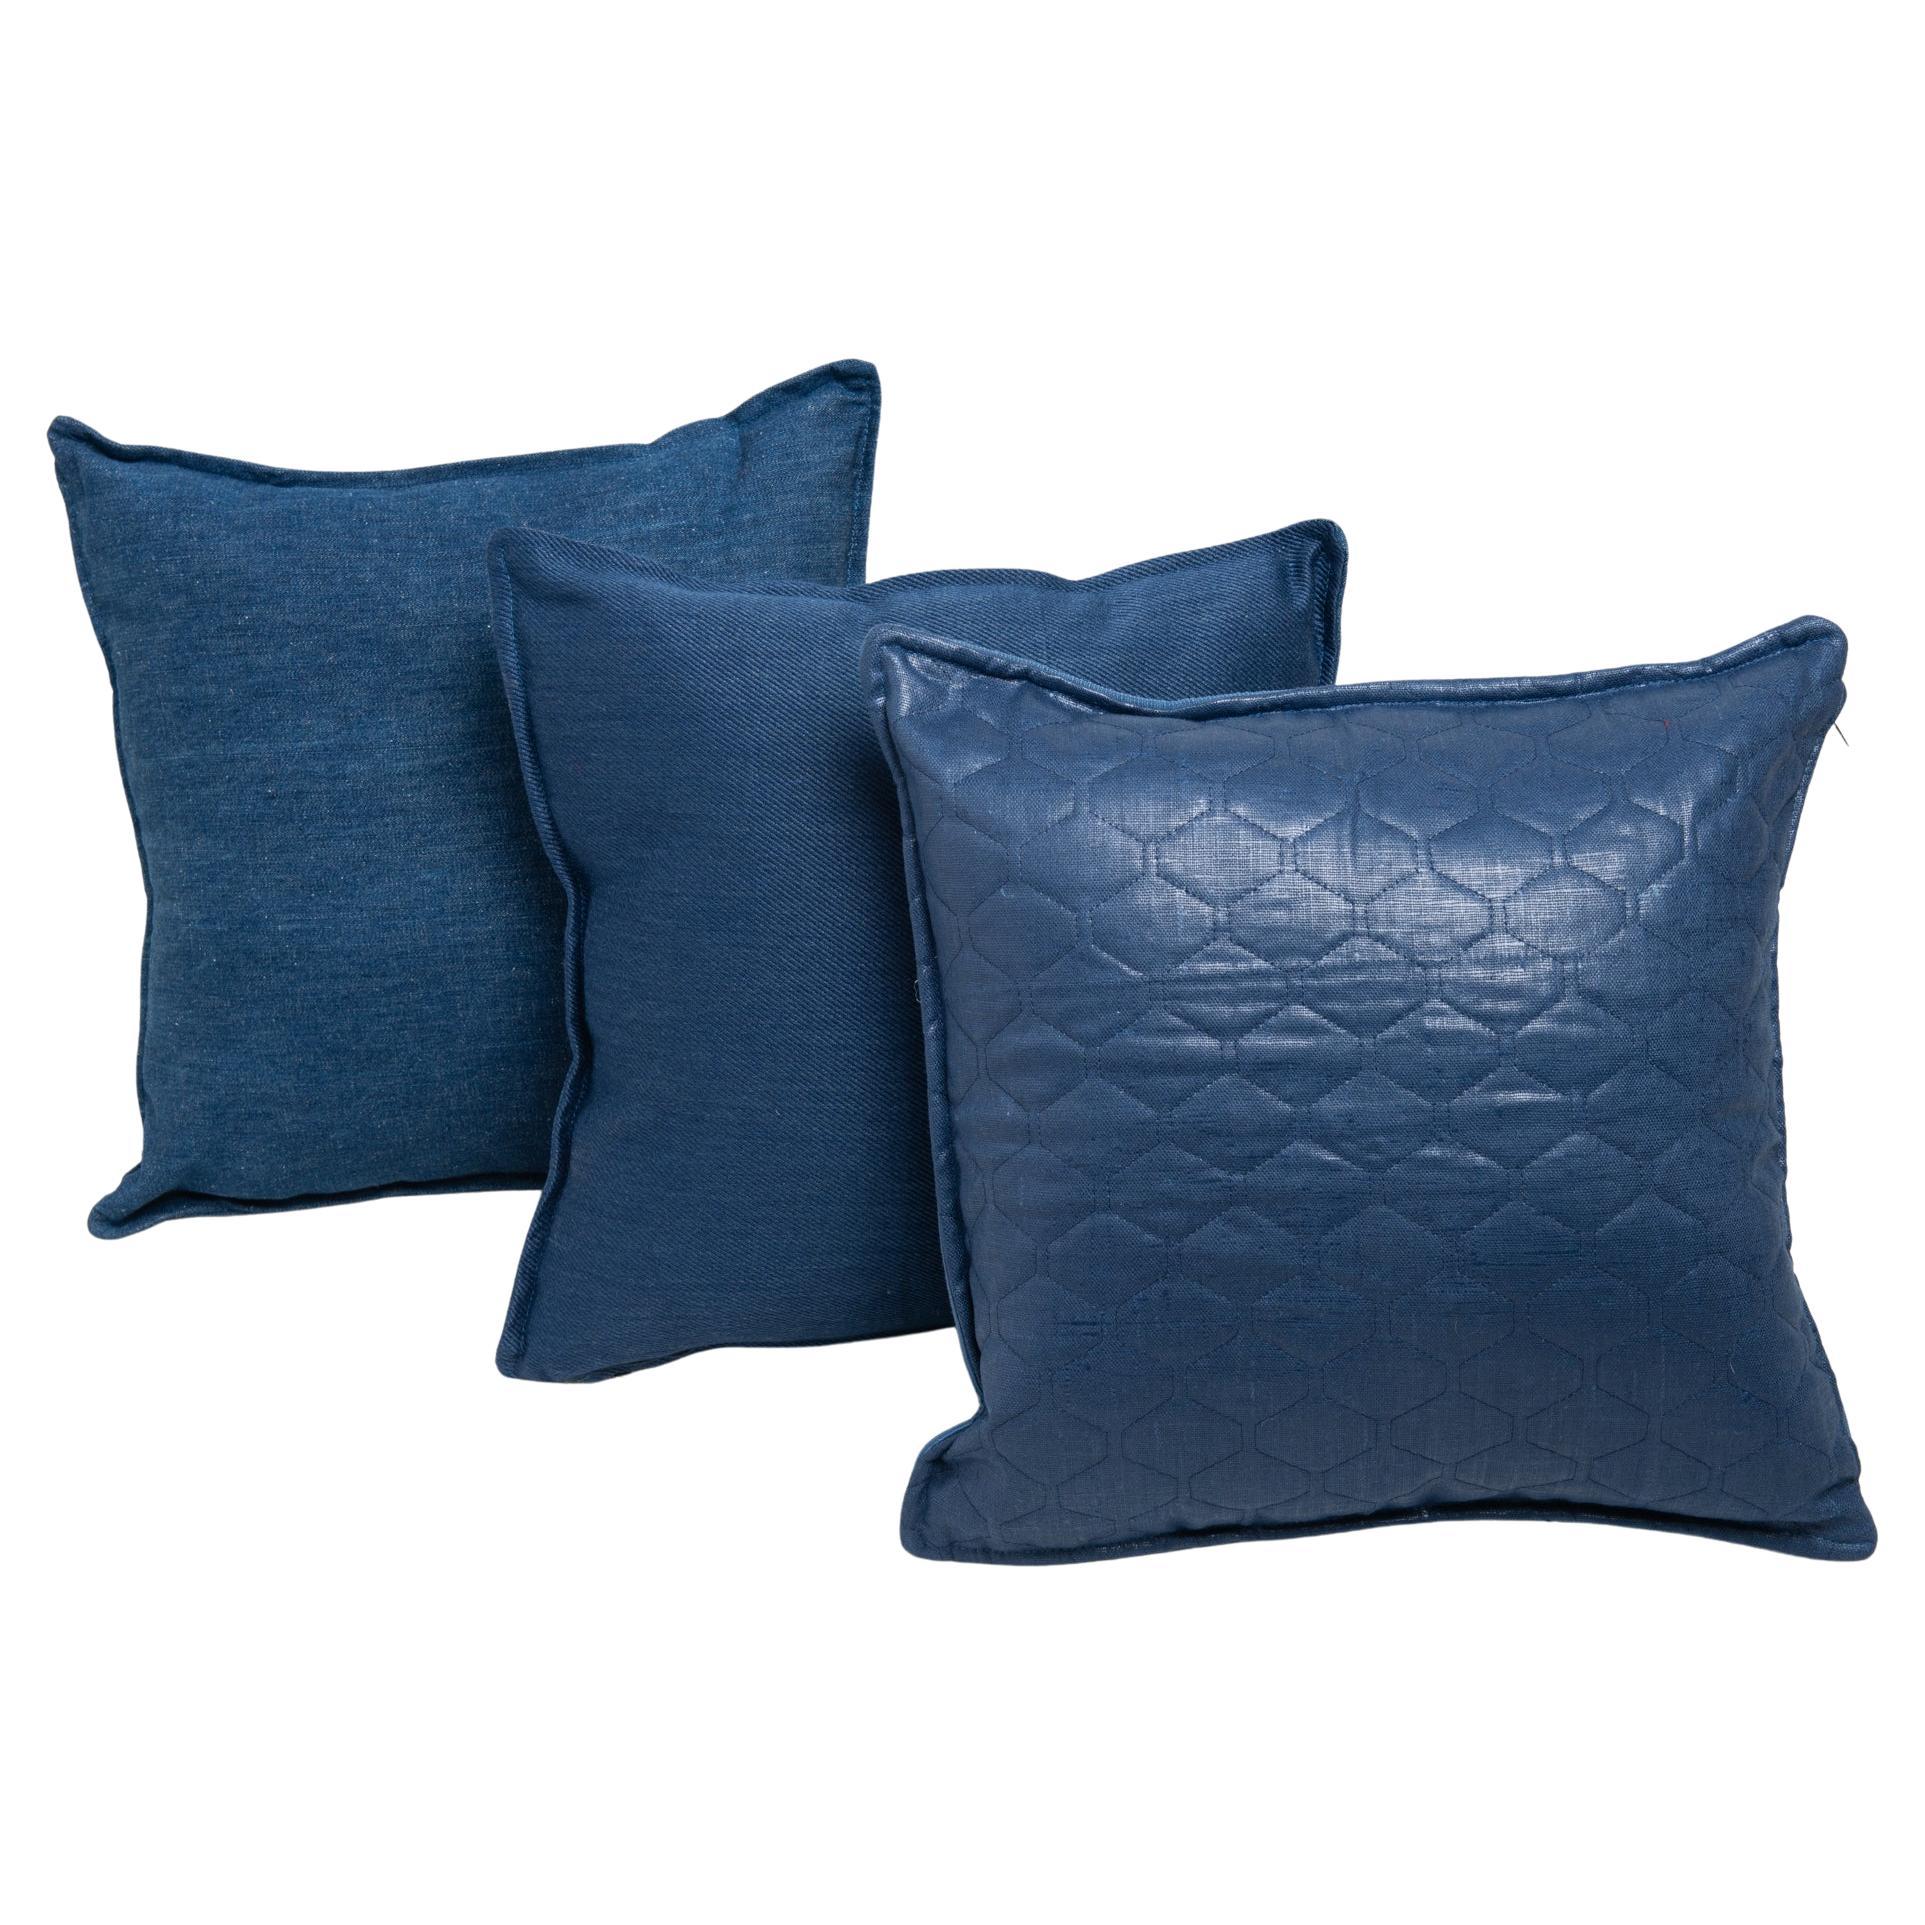 Three Casual Pillows in Old Denim Fabric